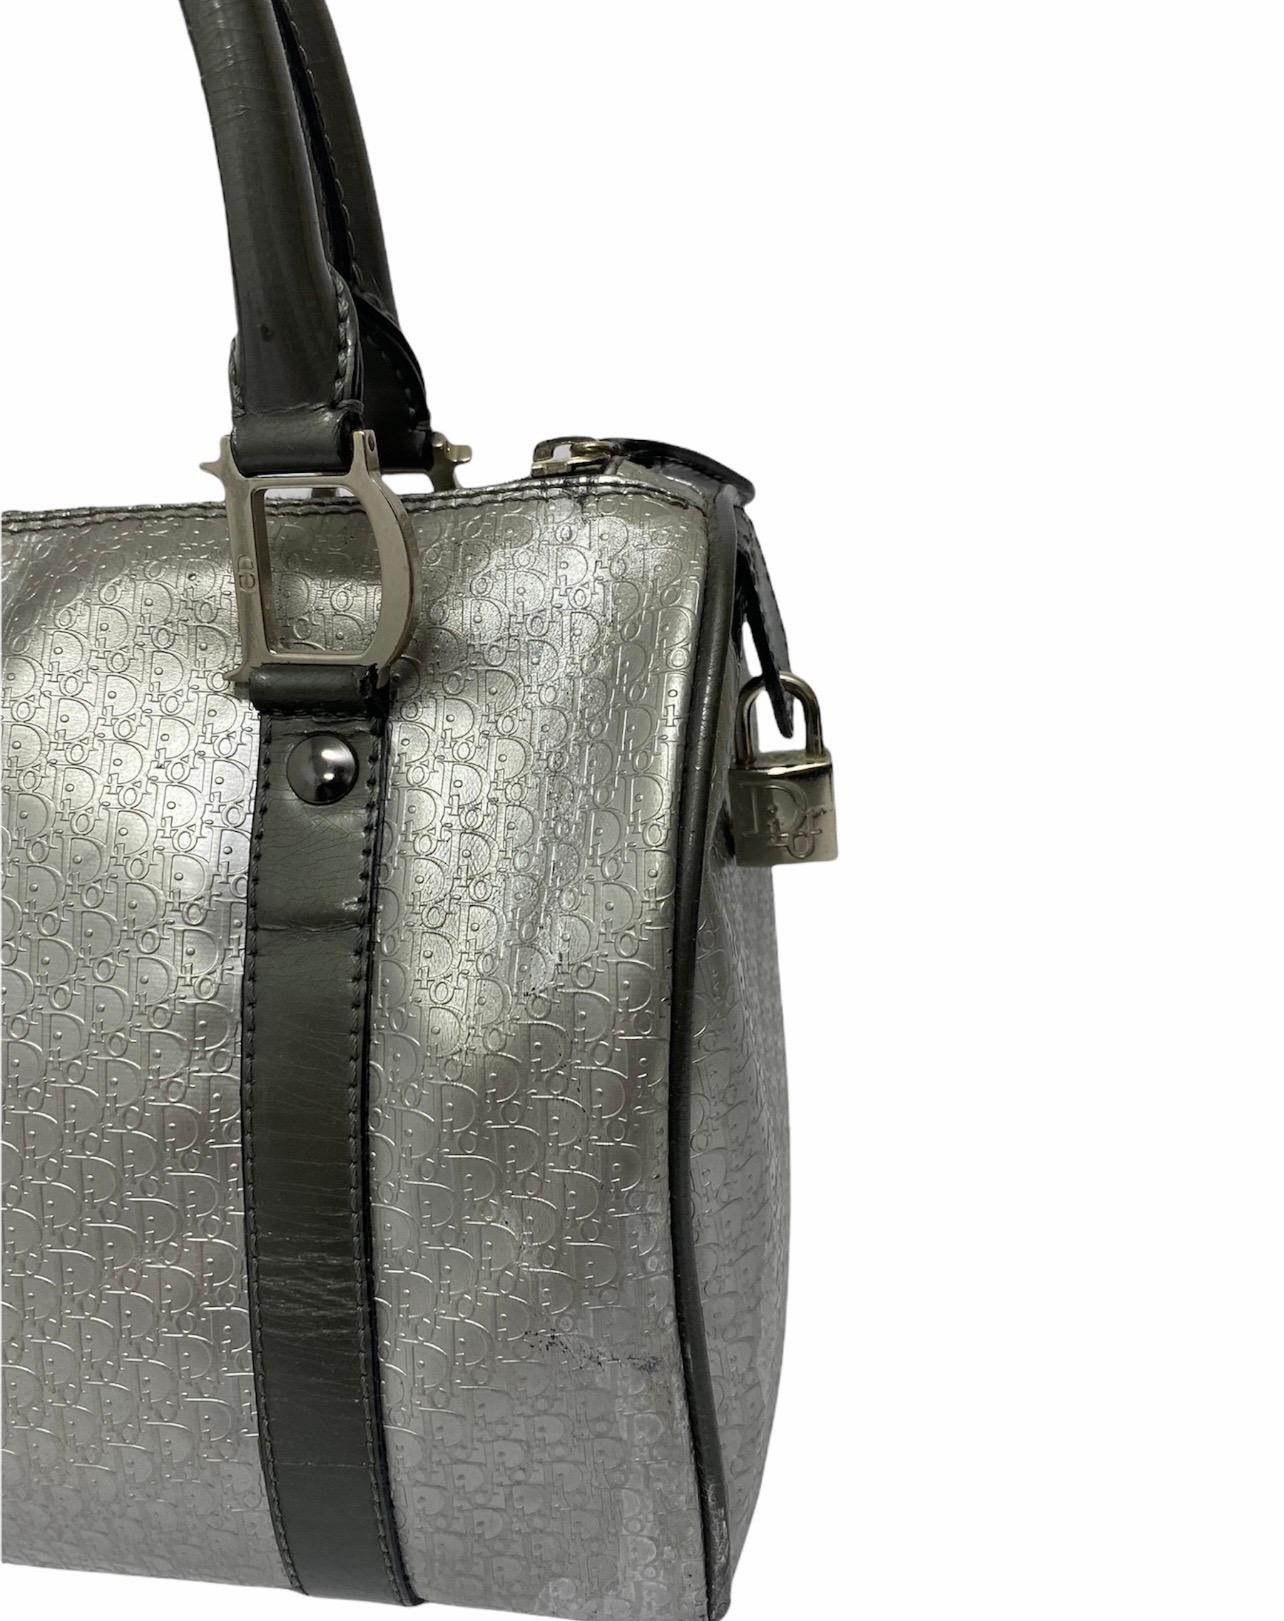 Satchel signed Dior, made of silver leather with gray patent inserts and silver hardware. Equipped with a zip closure, internally lined in black nylon, quite roomy. Equipped with double rigid handle in gray leather and internal pockets with and